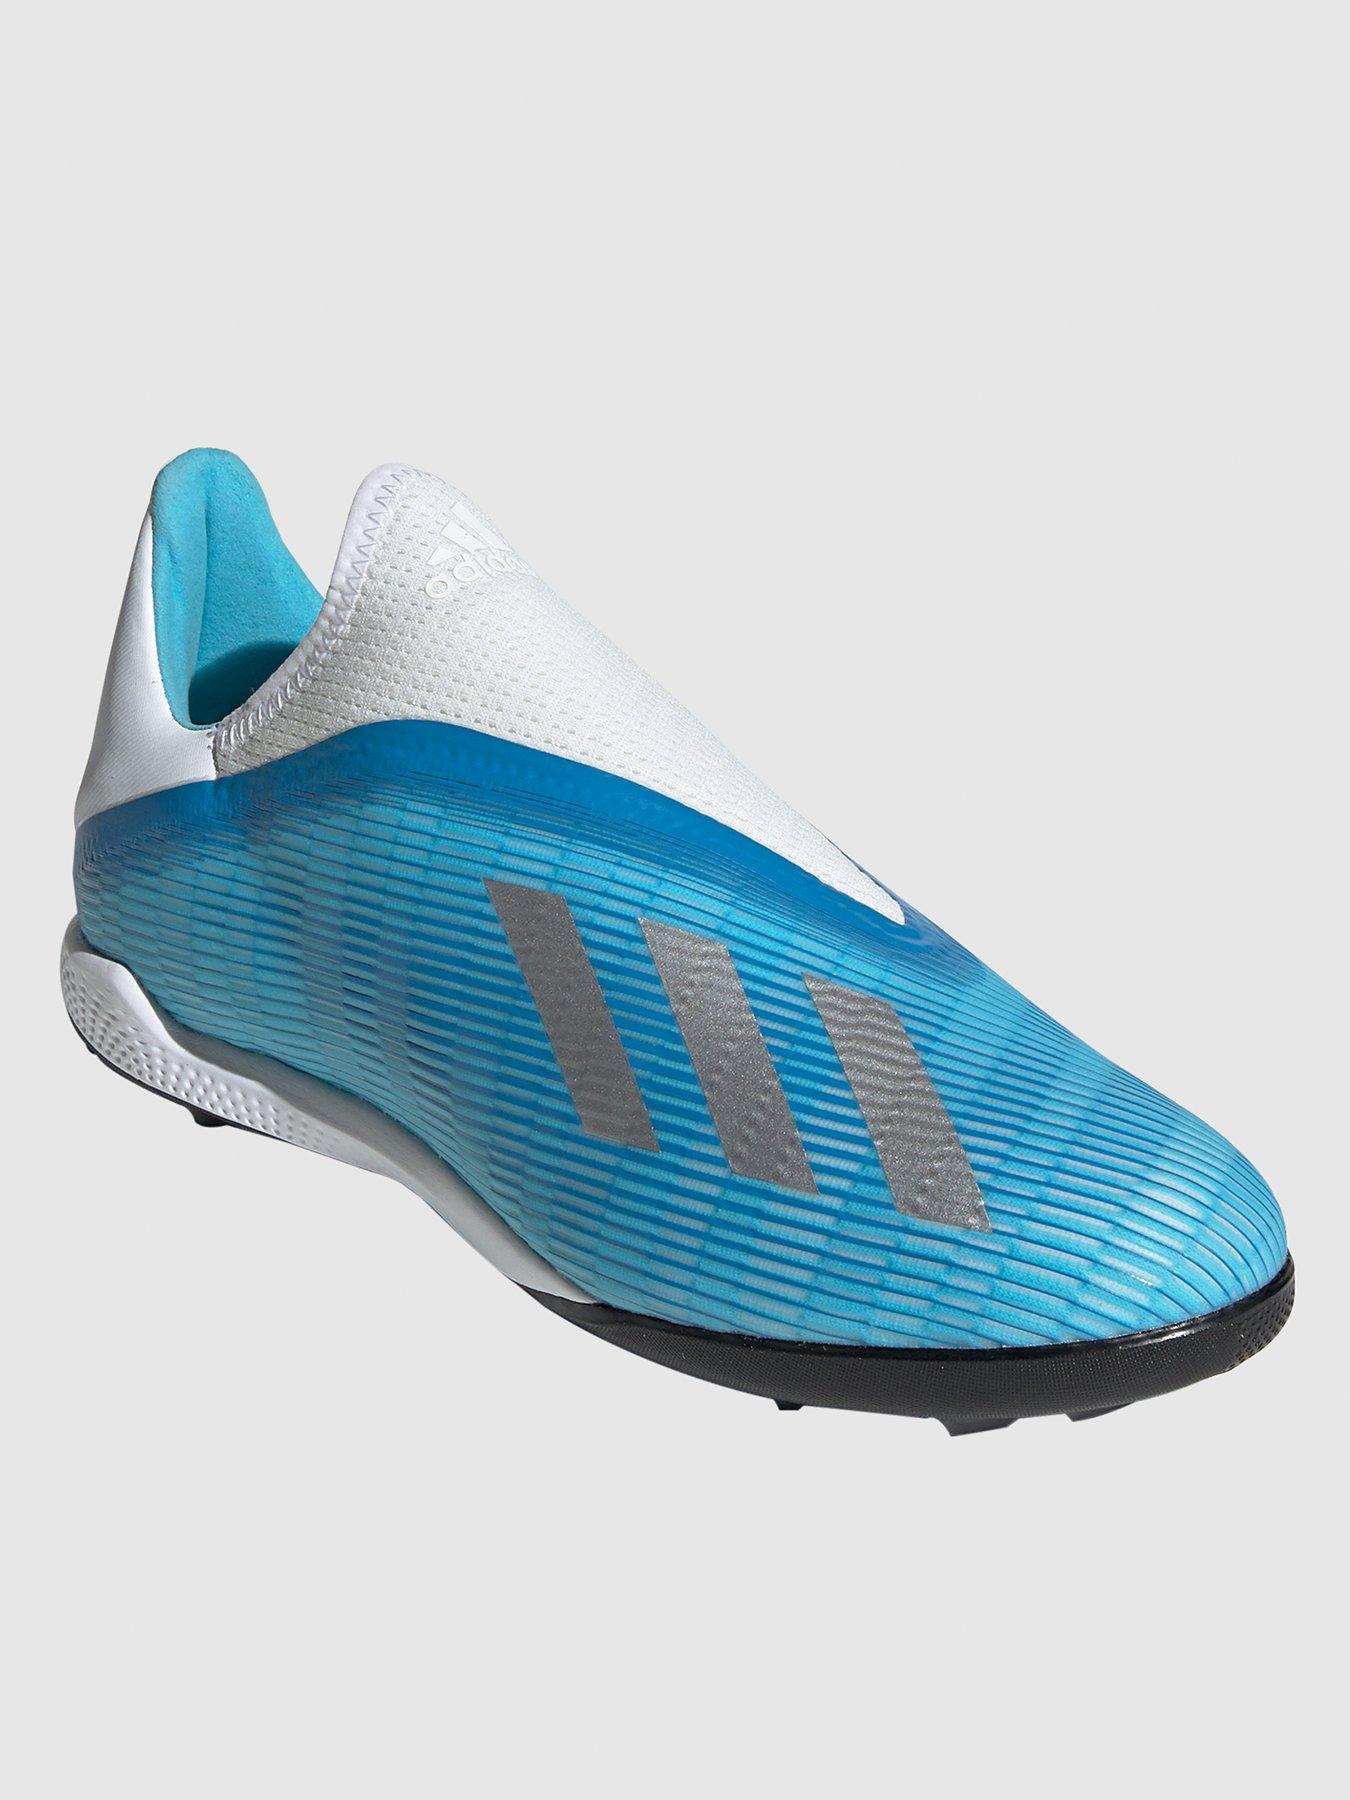 blue astro turf boots